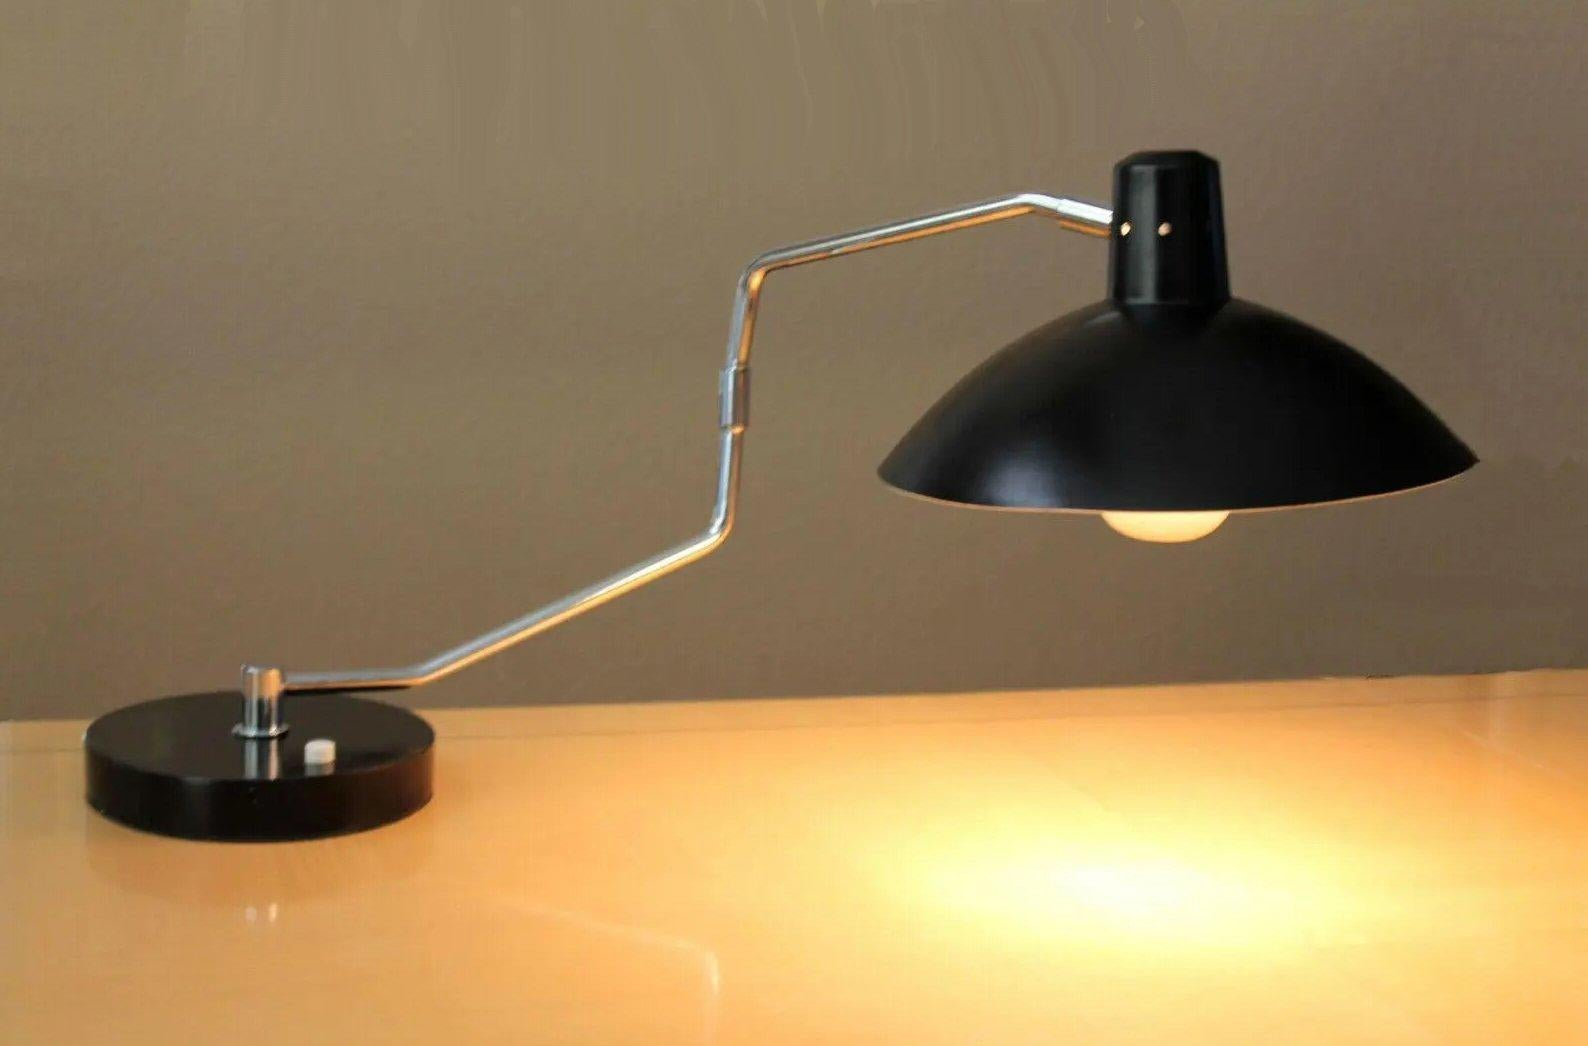 Mid-Century Modern Clay Michie For Knoll Swing Arm Saucer Desk Lamp, 1950s Mid Century Good Design For Sale